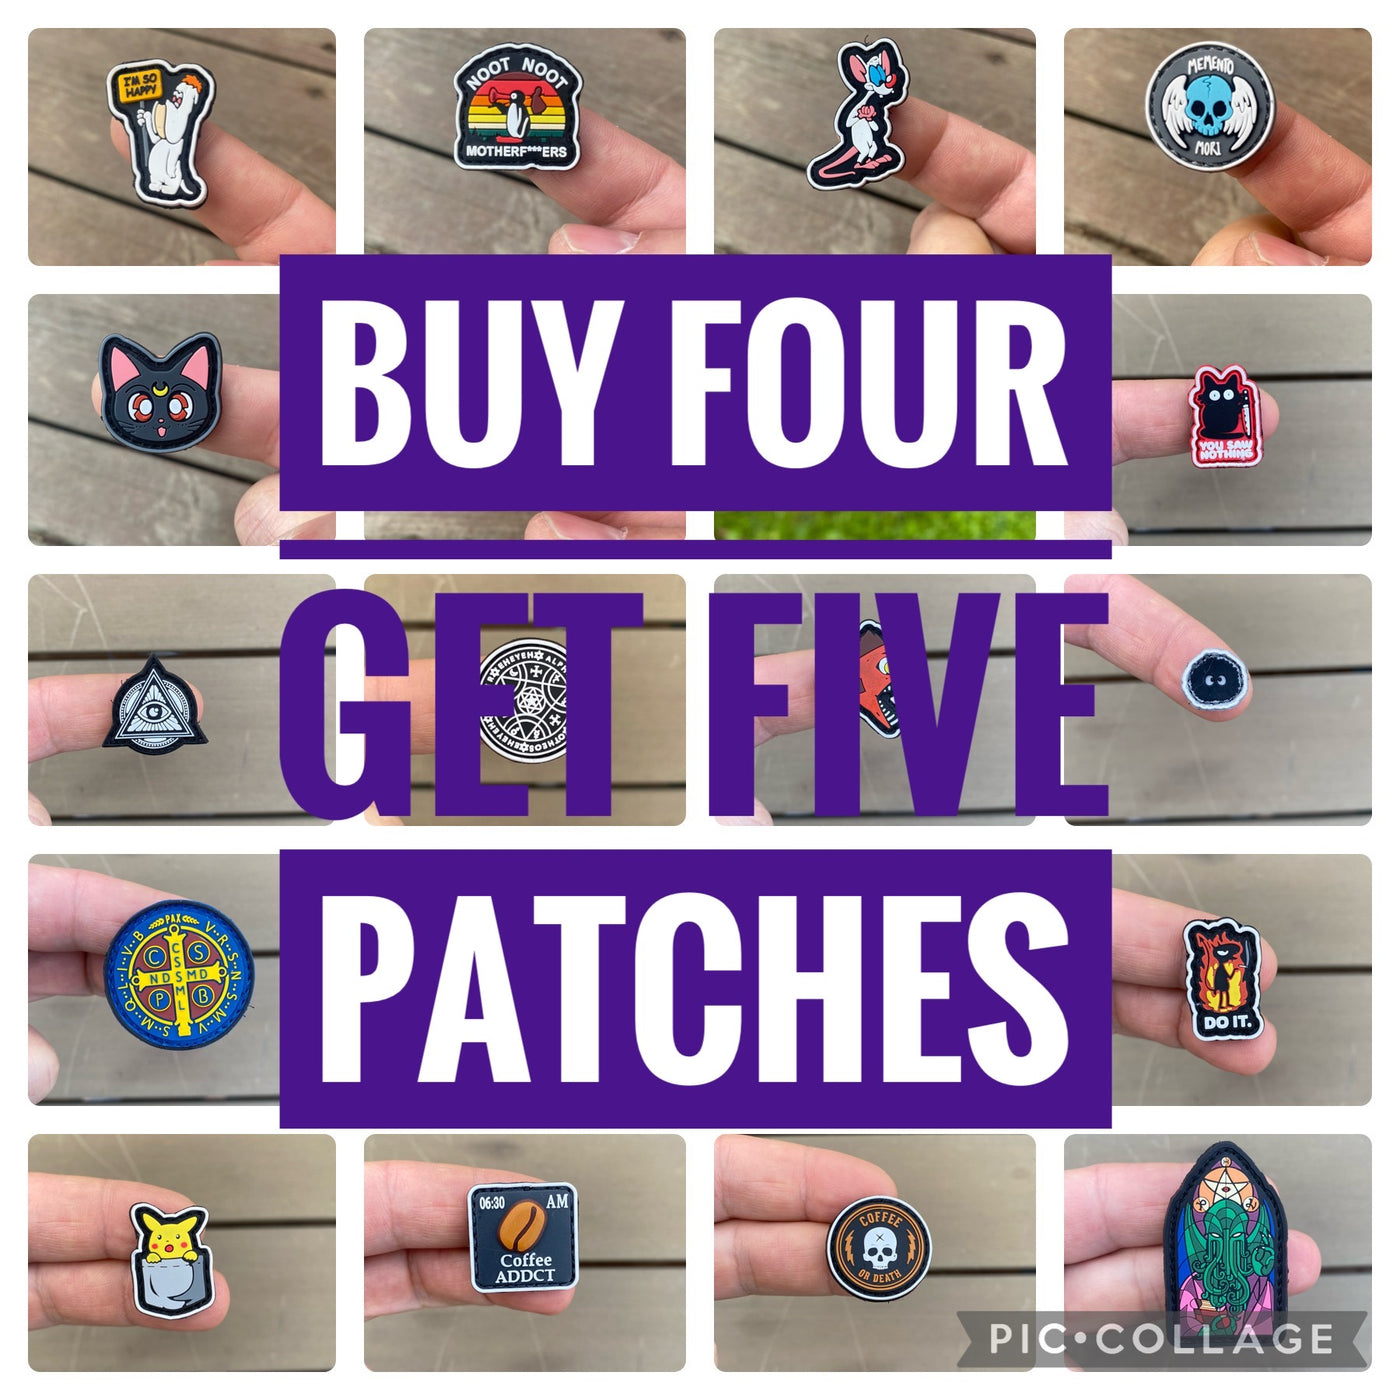 Buy four Get five of any patches